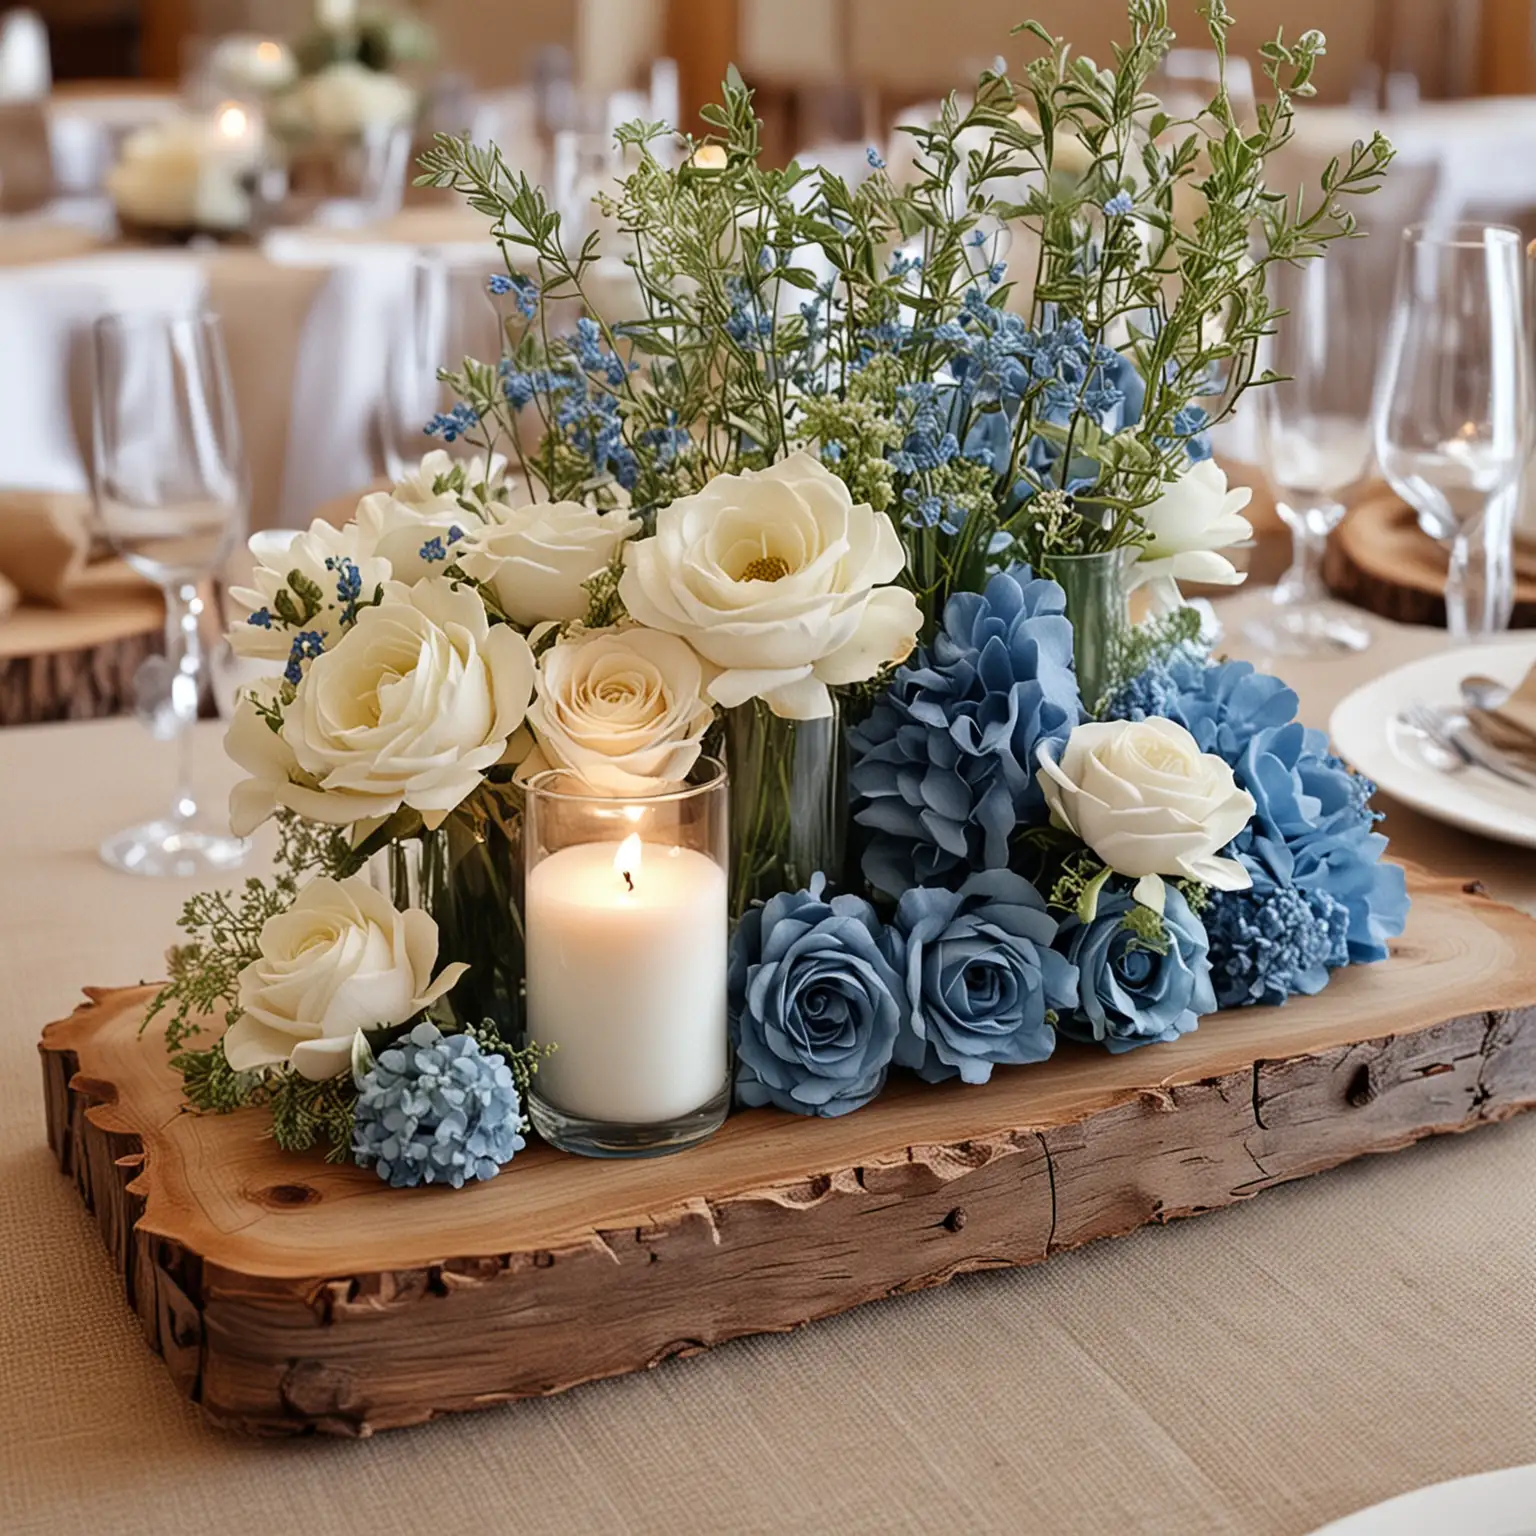 Simple-Rustic-Blue-and-White-Wedding-Centerpiece-on-Wood-Slab